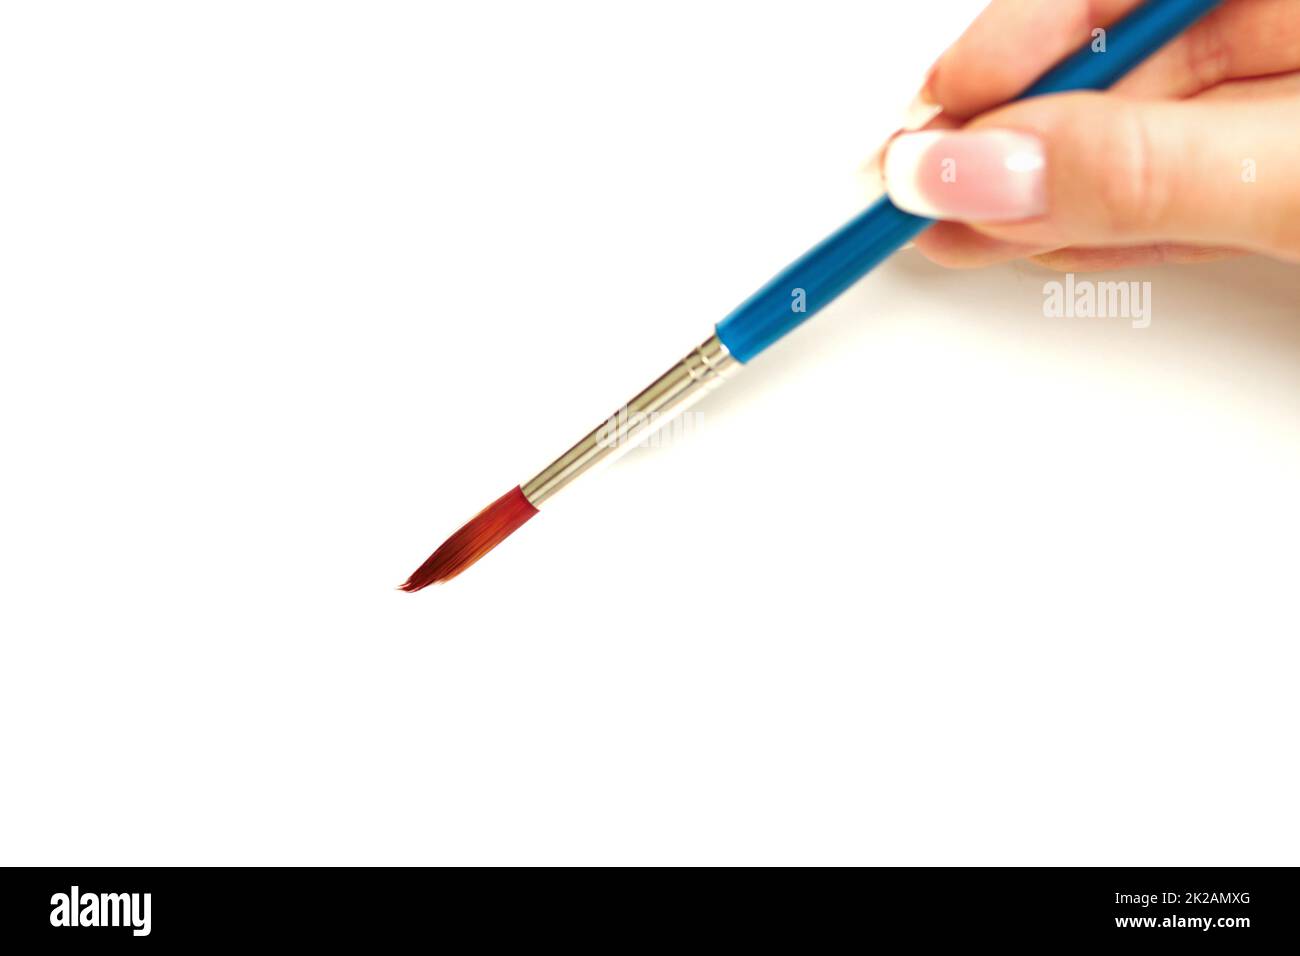 Close Up View Of A Hand Holding A Paintbrush High-Res Stock Photo